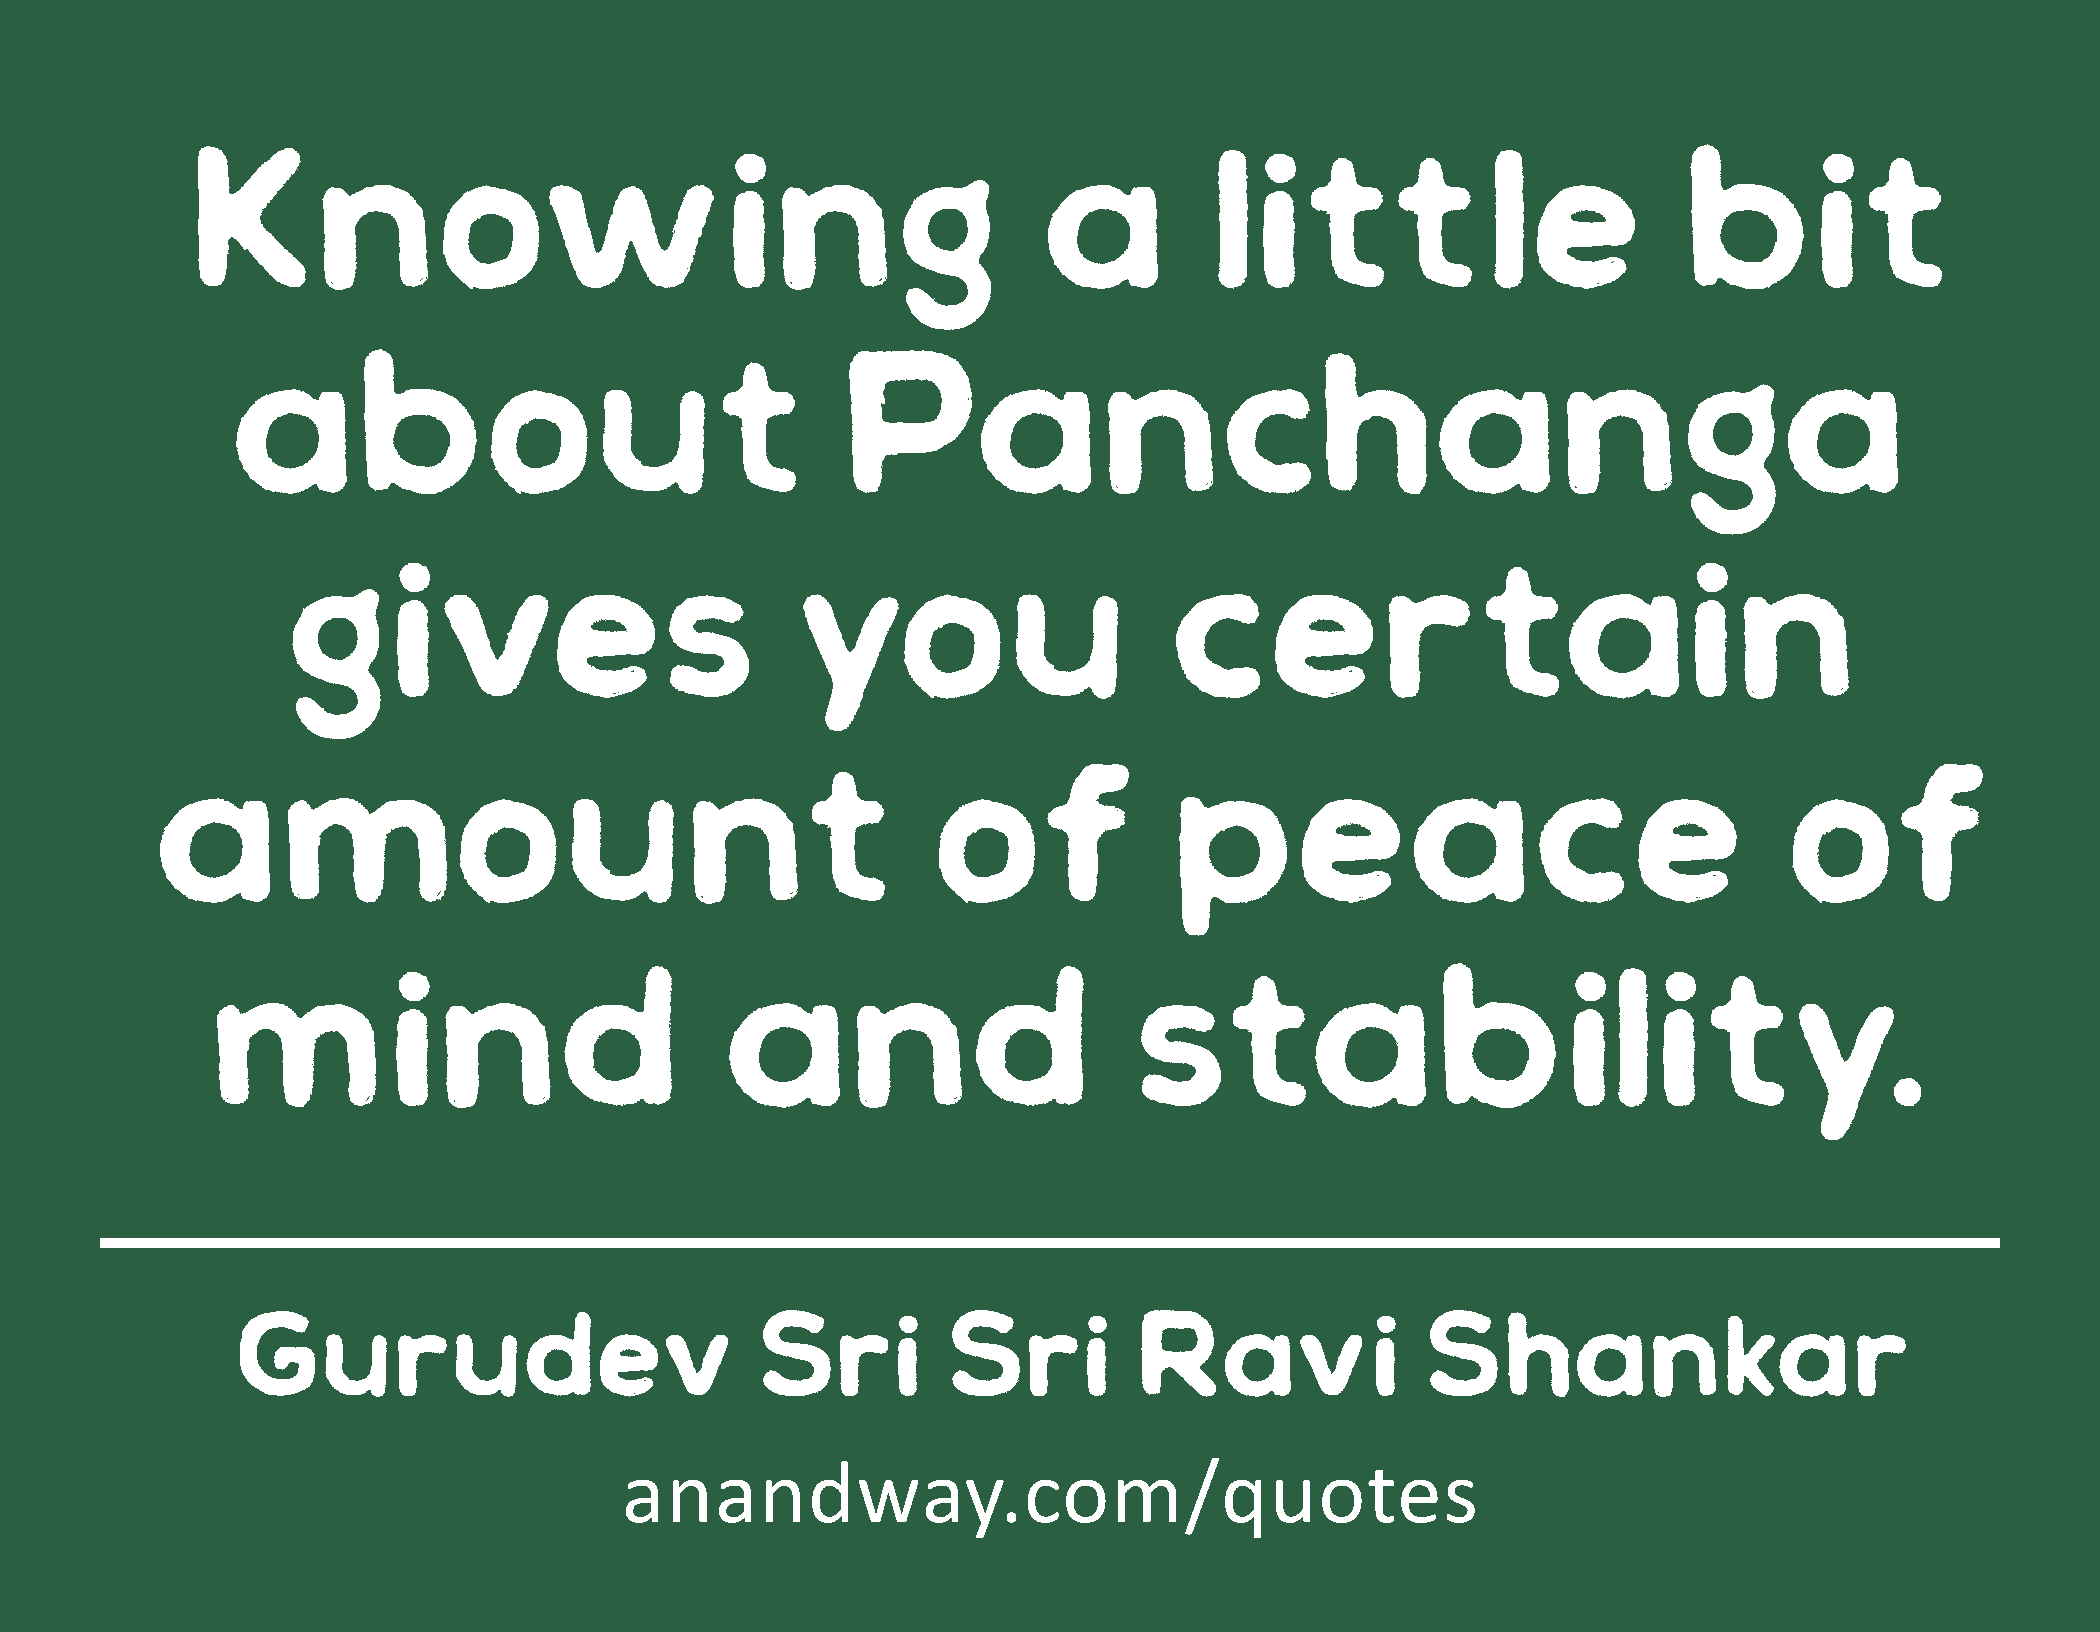 Knowing a little bit about Panchanga gives you certain amount of peace of mind and stability. 
 -Gurudev Sri Sri Ravi Shankar